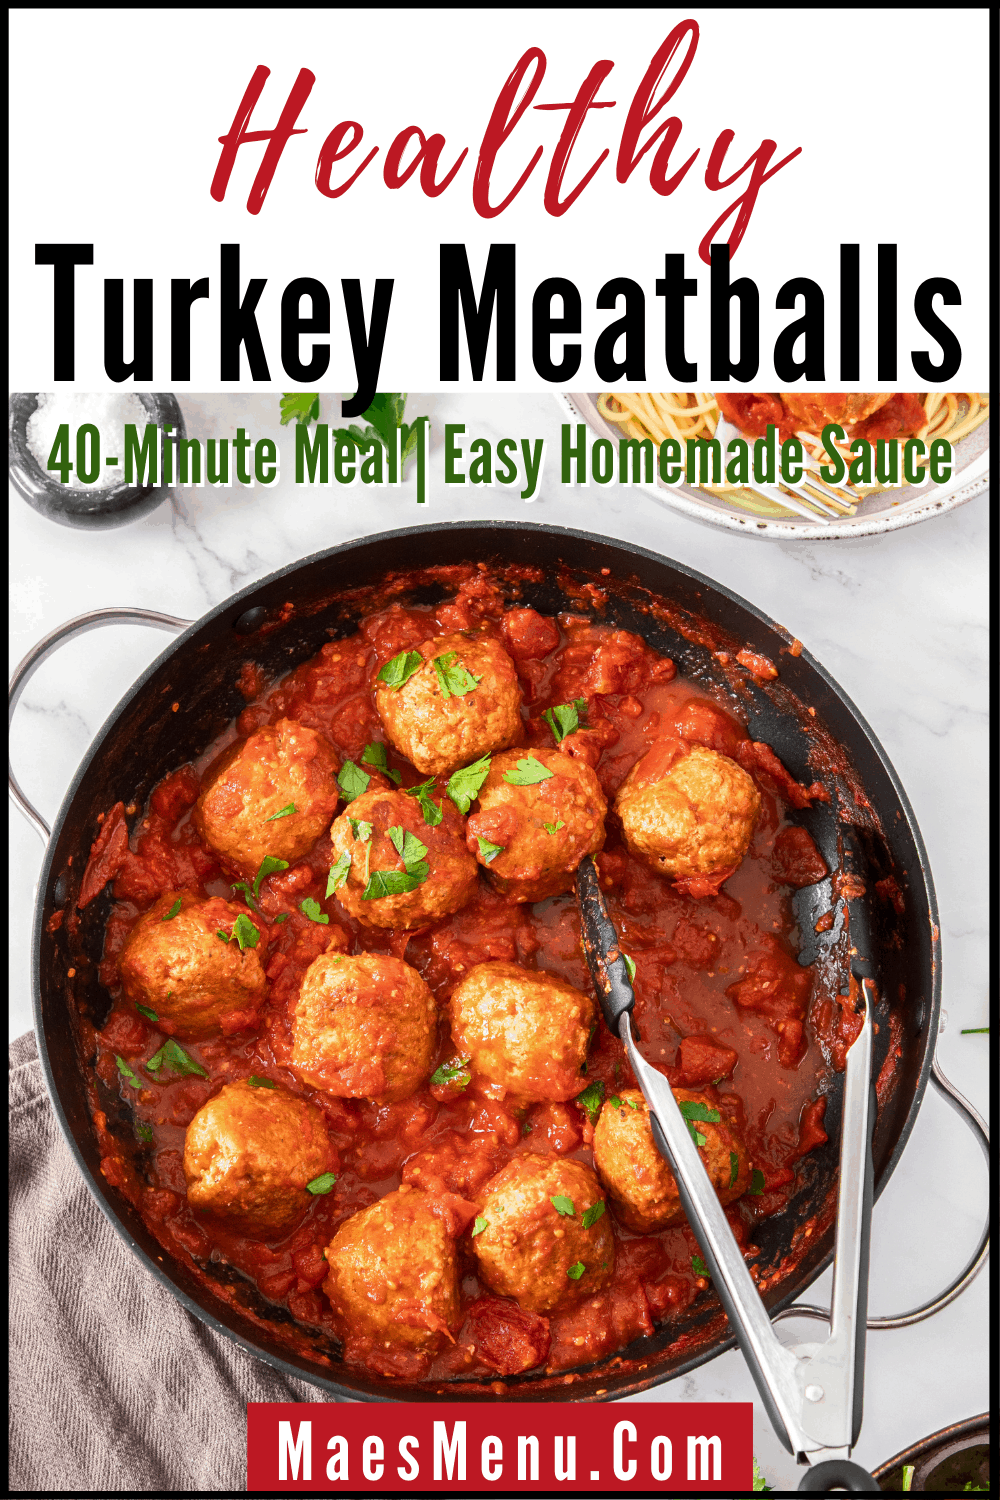 A pinterest pin for healthy turkey meatballs with an overhead shot of a black skillet full of meatballs